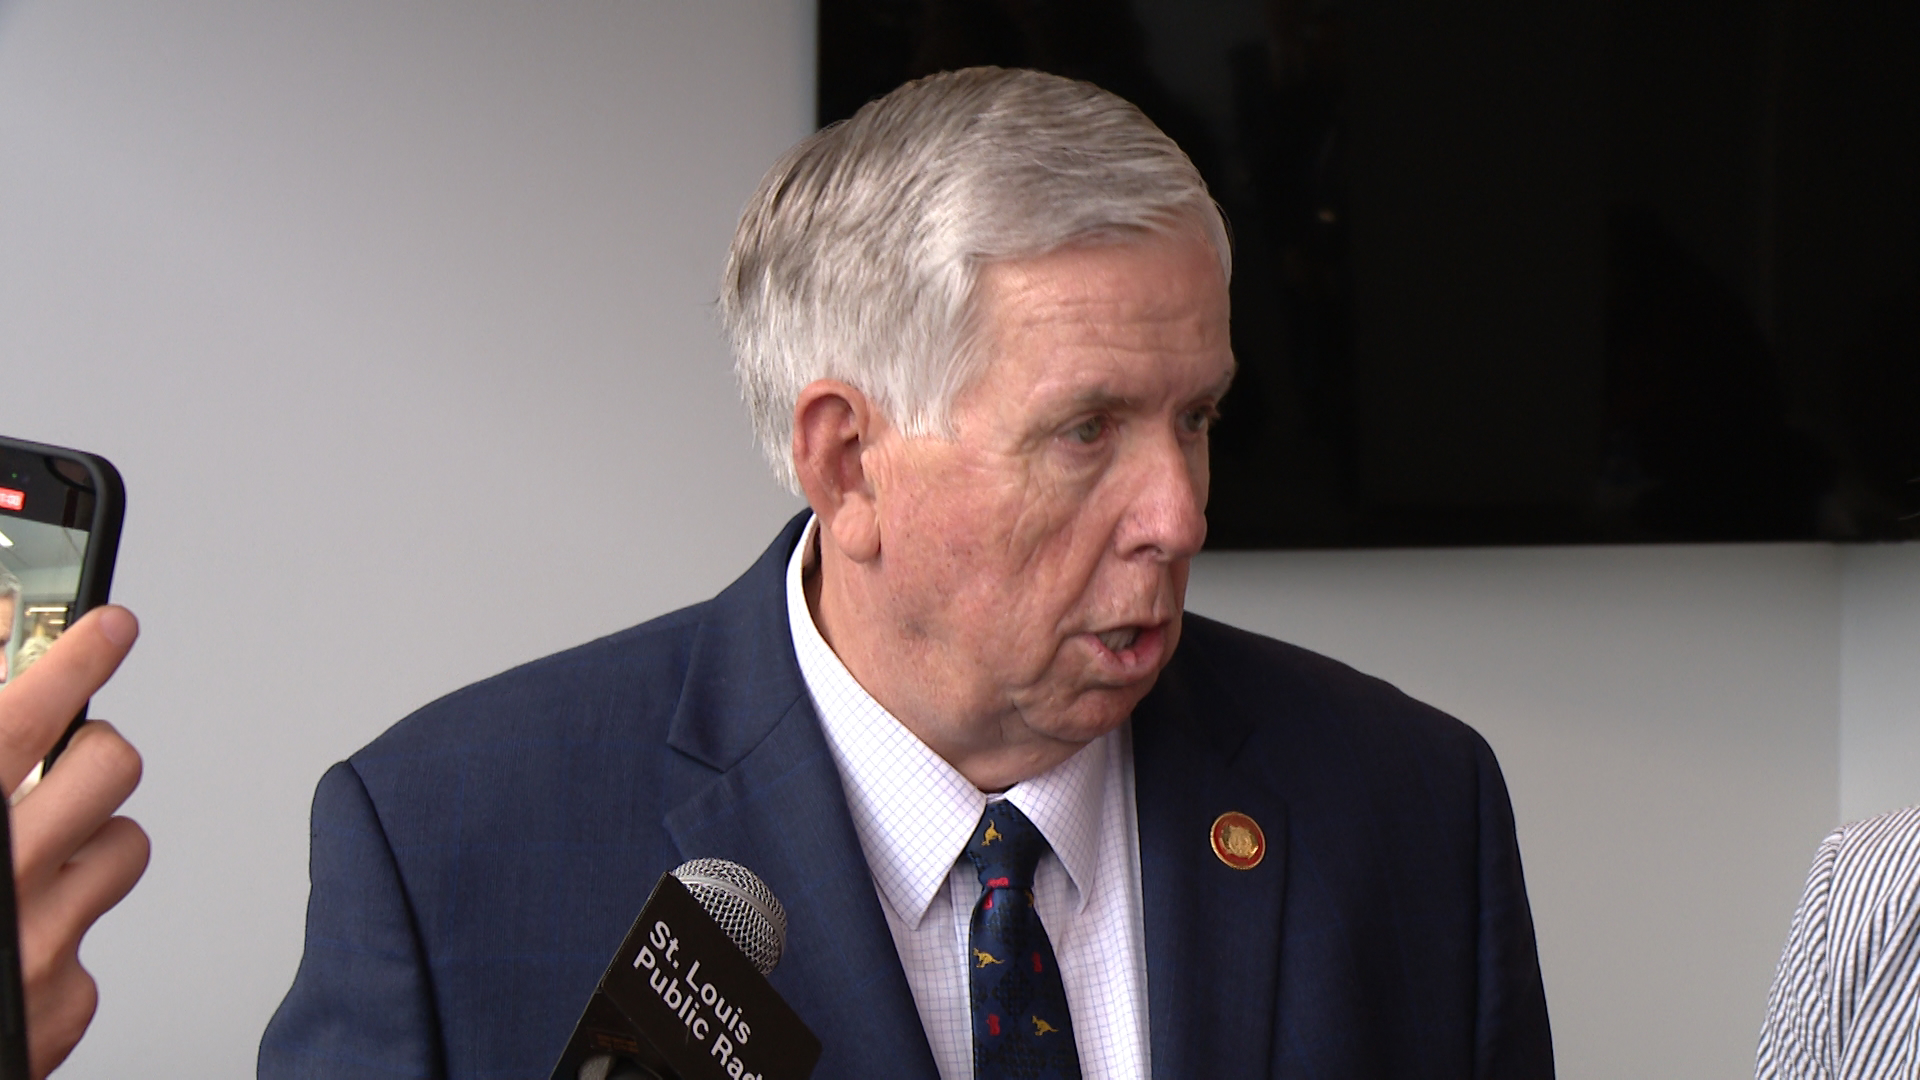 During an appearance Tuesday in St. Louis, Missouri Gov. Mike Parson talked with reporters about the sudden resignation of Kim Gardner as circuit attorney.